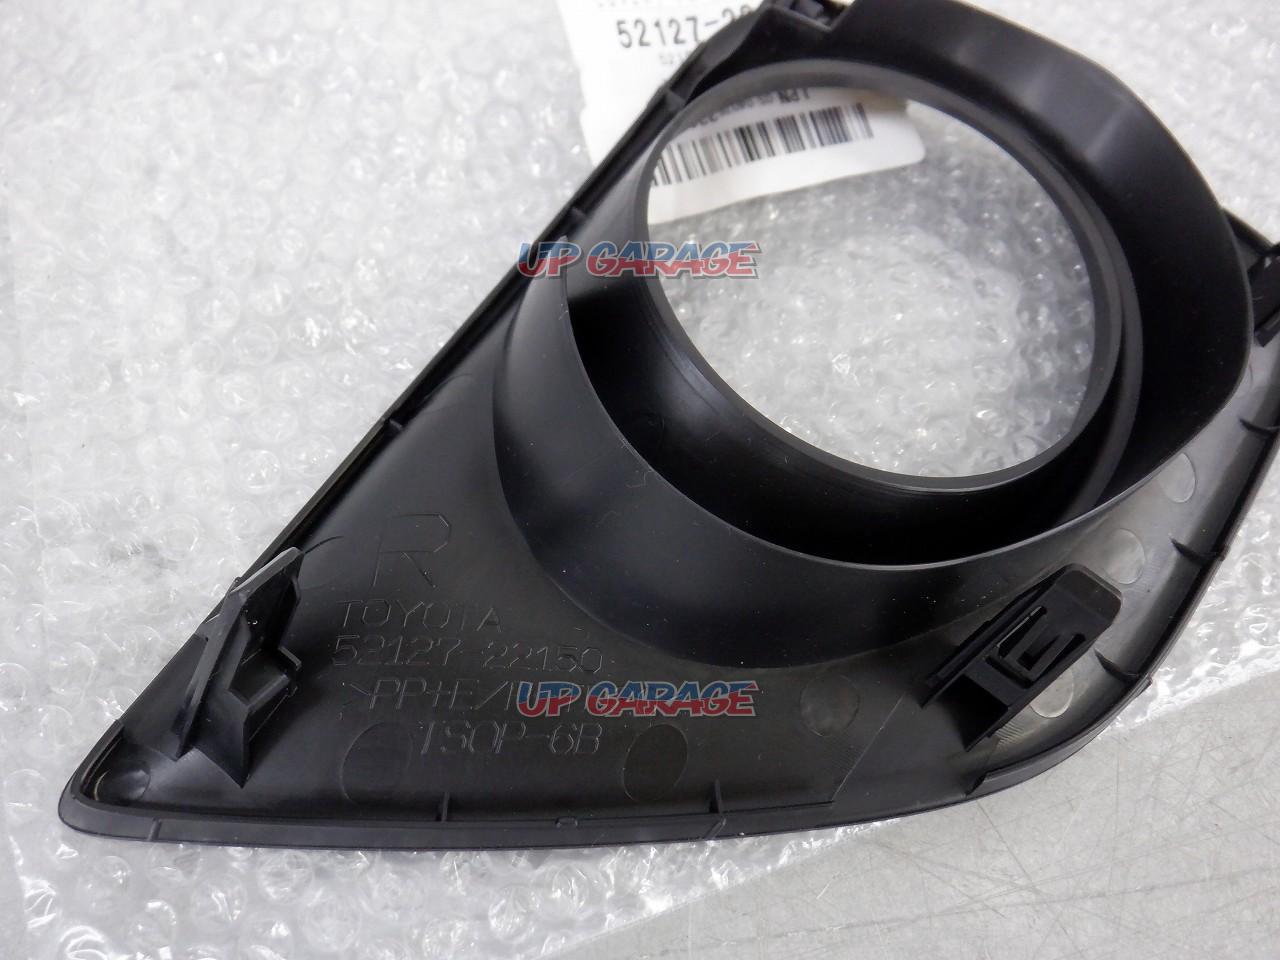 Right Side Only] TOYOTA Genuine Fog Cover 52127-22150, Body Parts  Accessories